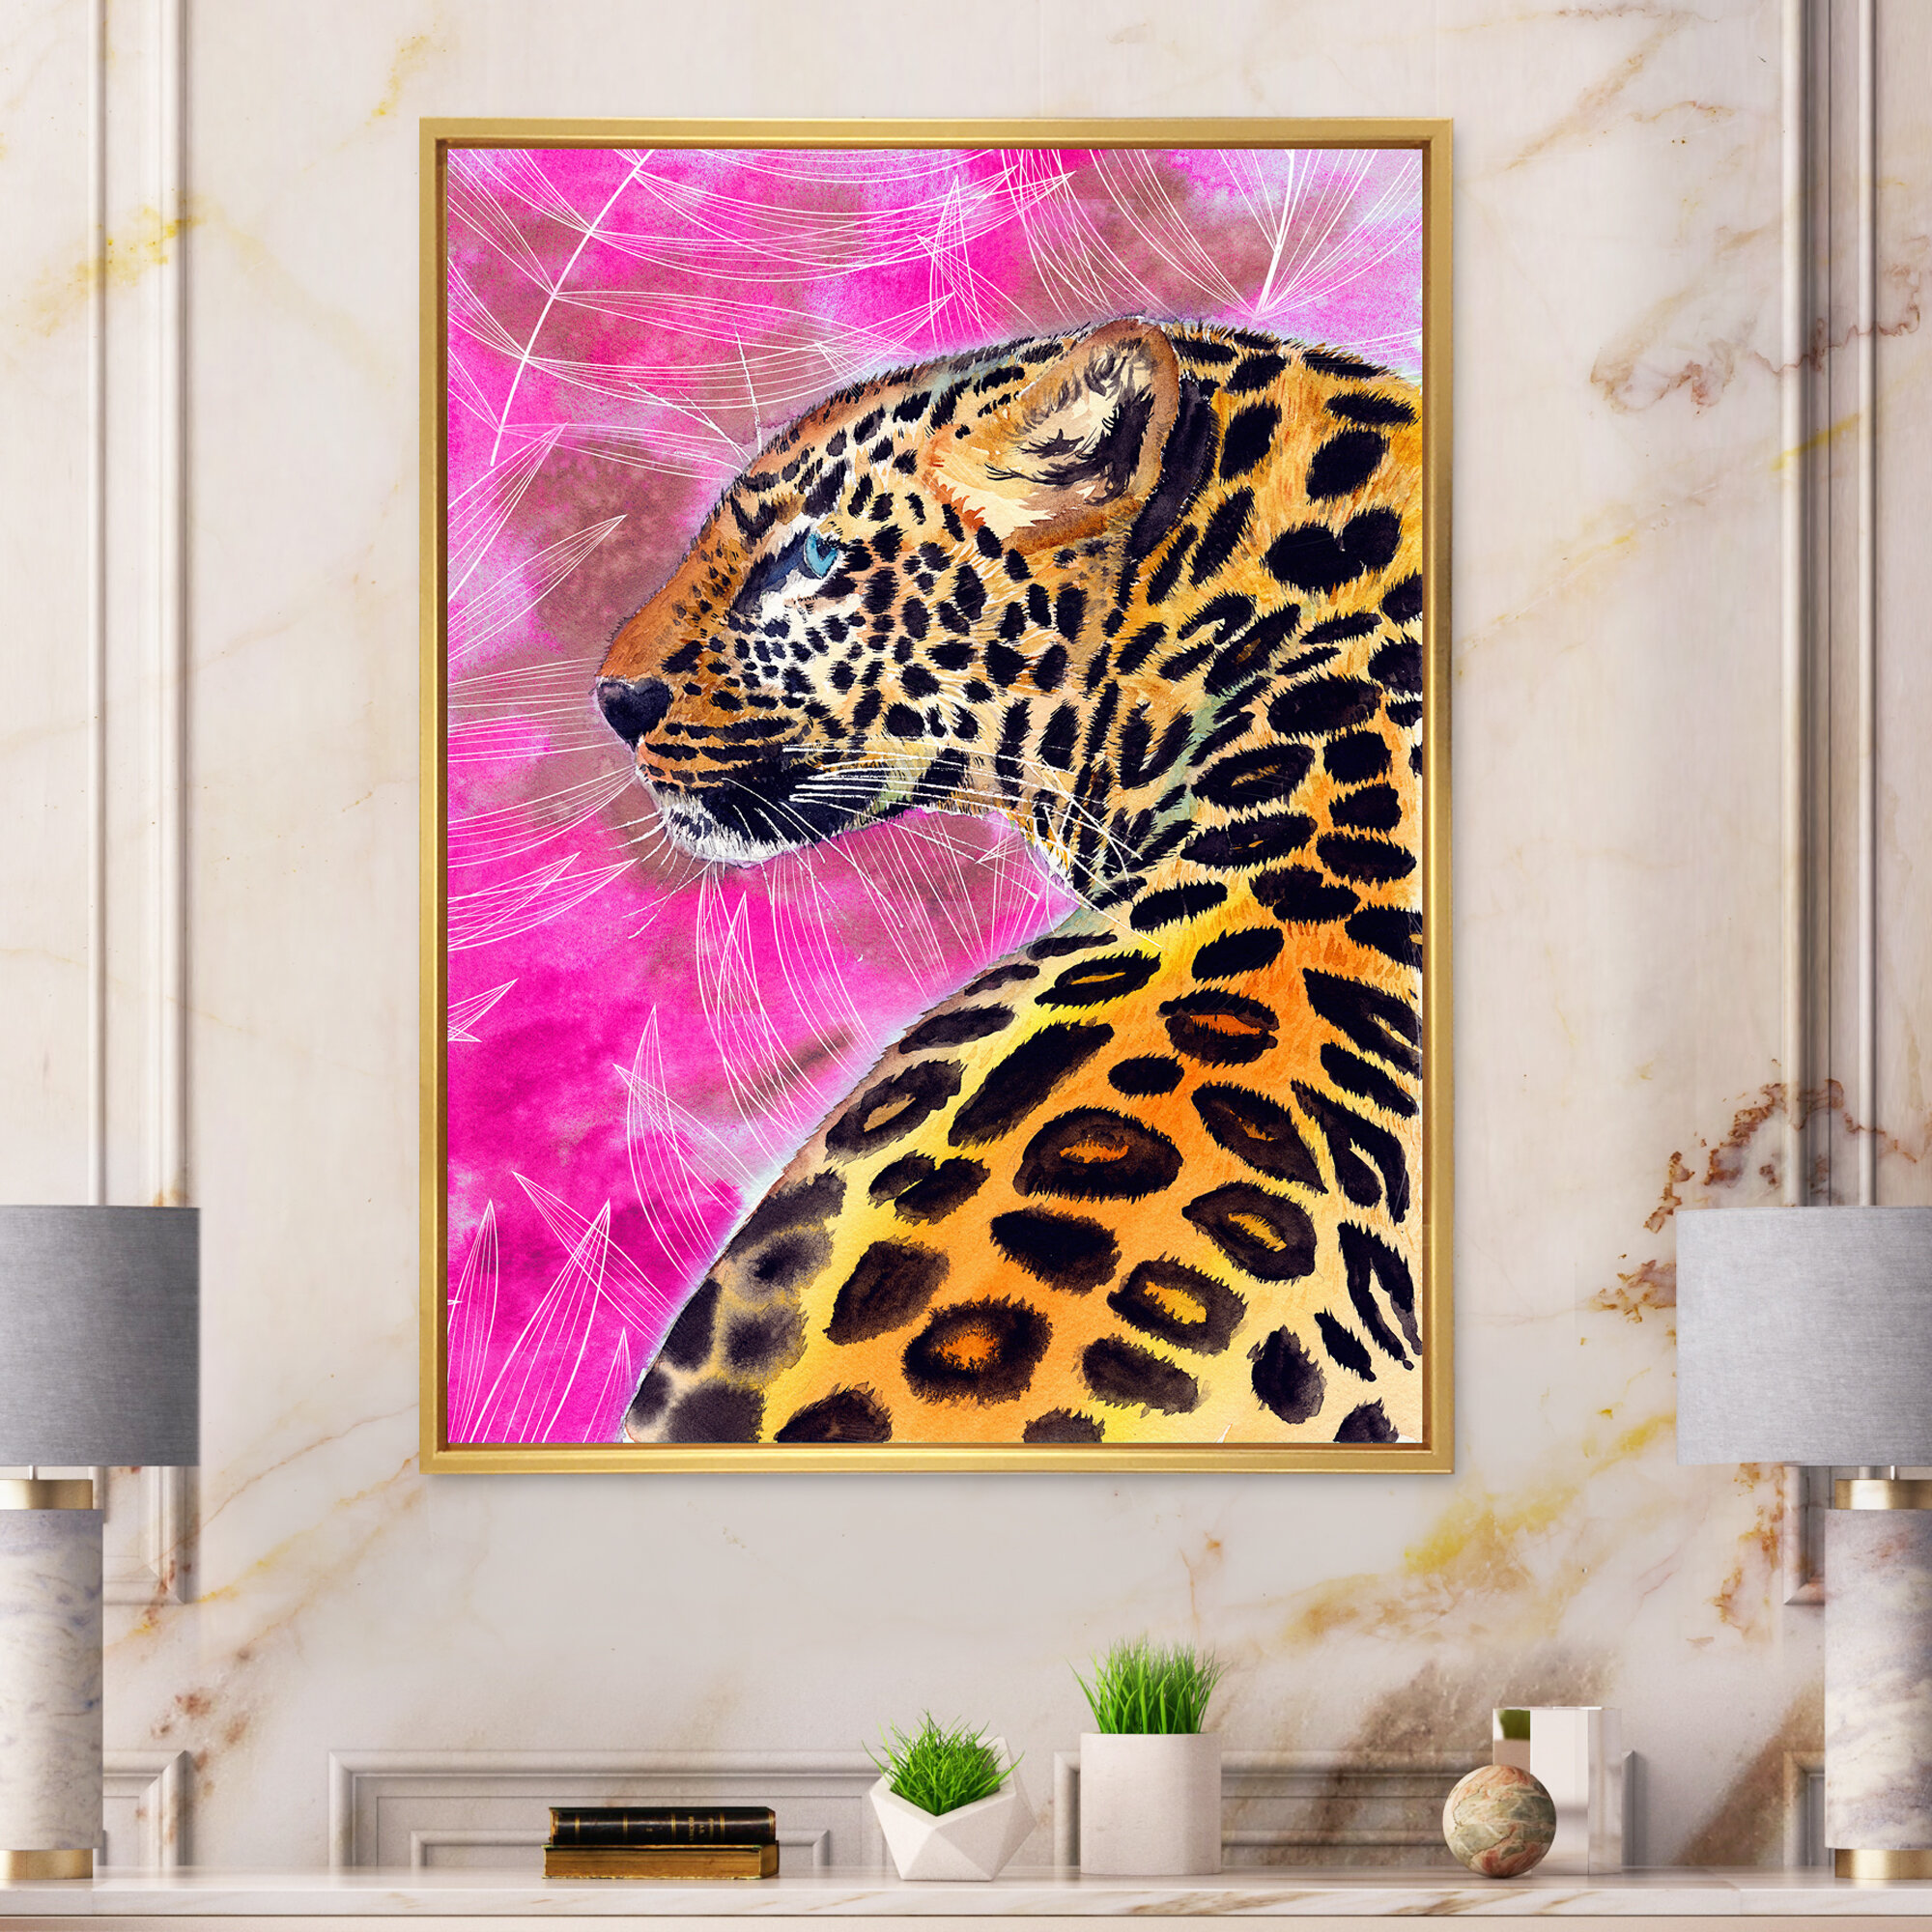 Golden Leopard with Black Spots on Pink - Print on Canvas East Urban Home Format: Gold Floater Framed, Size: 32 H x 16 W